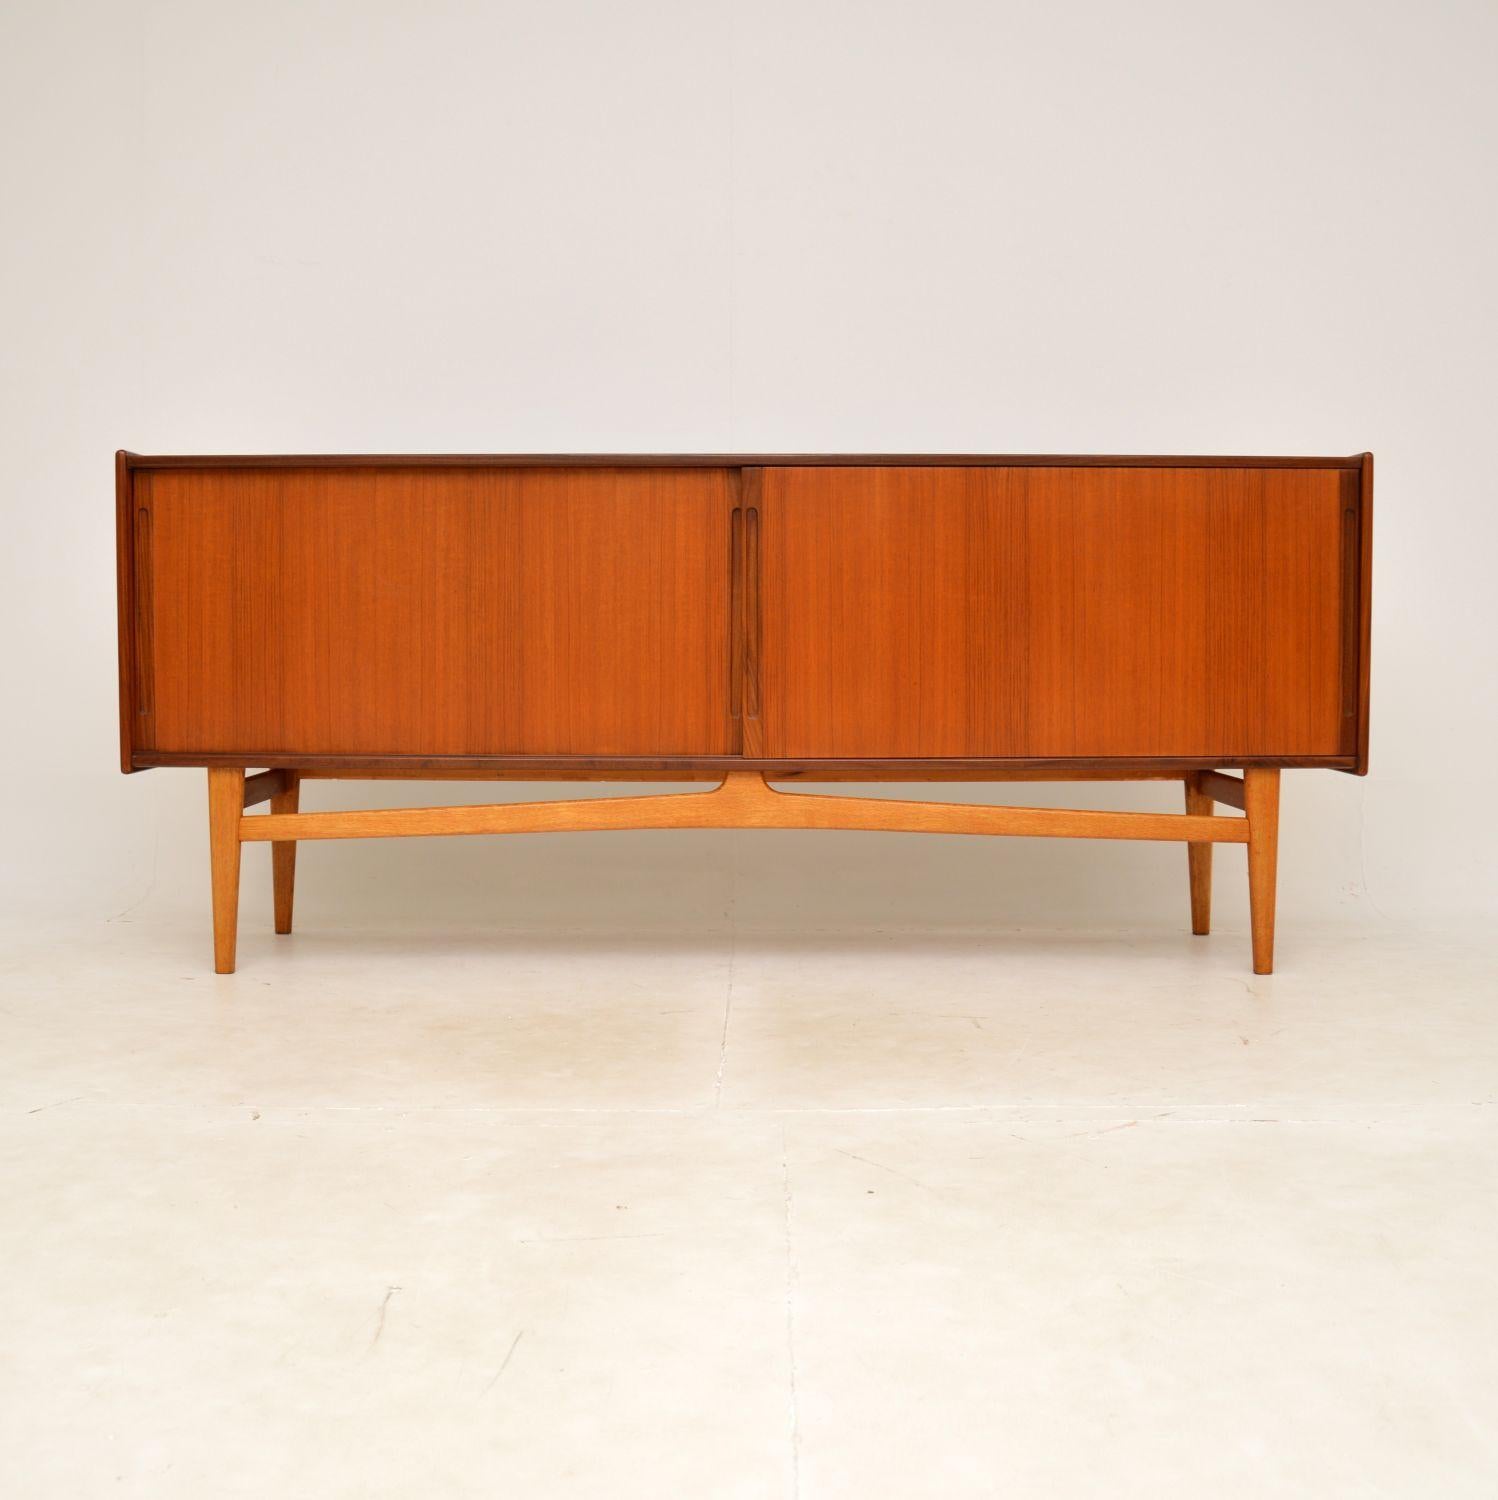 A superb vintage Danish sideboard in teak, this dates from the 1960’s.

It is very stylish, it is of amazing quality and is a great size. There are two sliding doors that open to reveal lots of storage space, with adjustable shelving and two